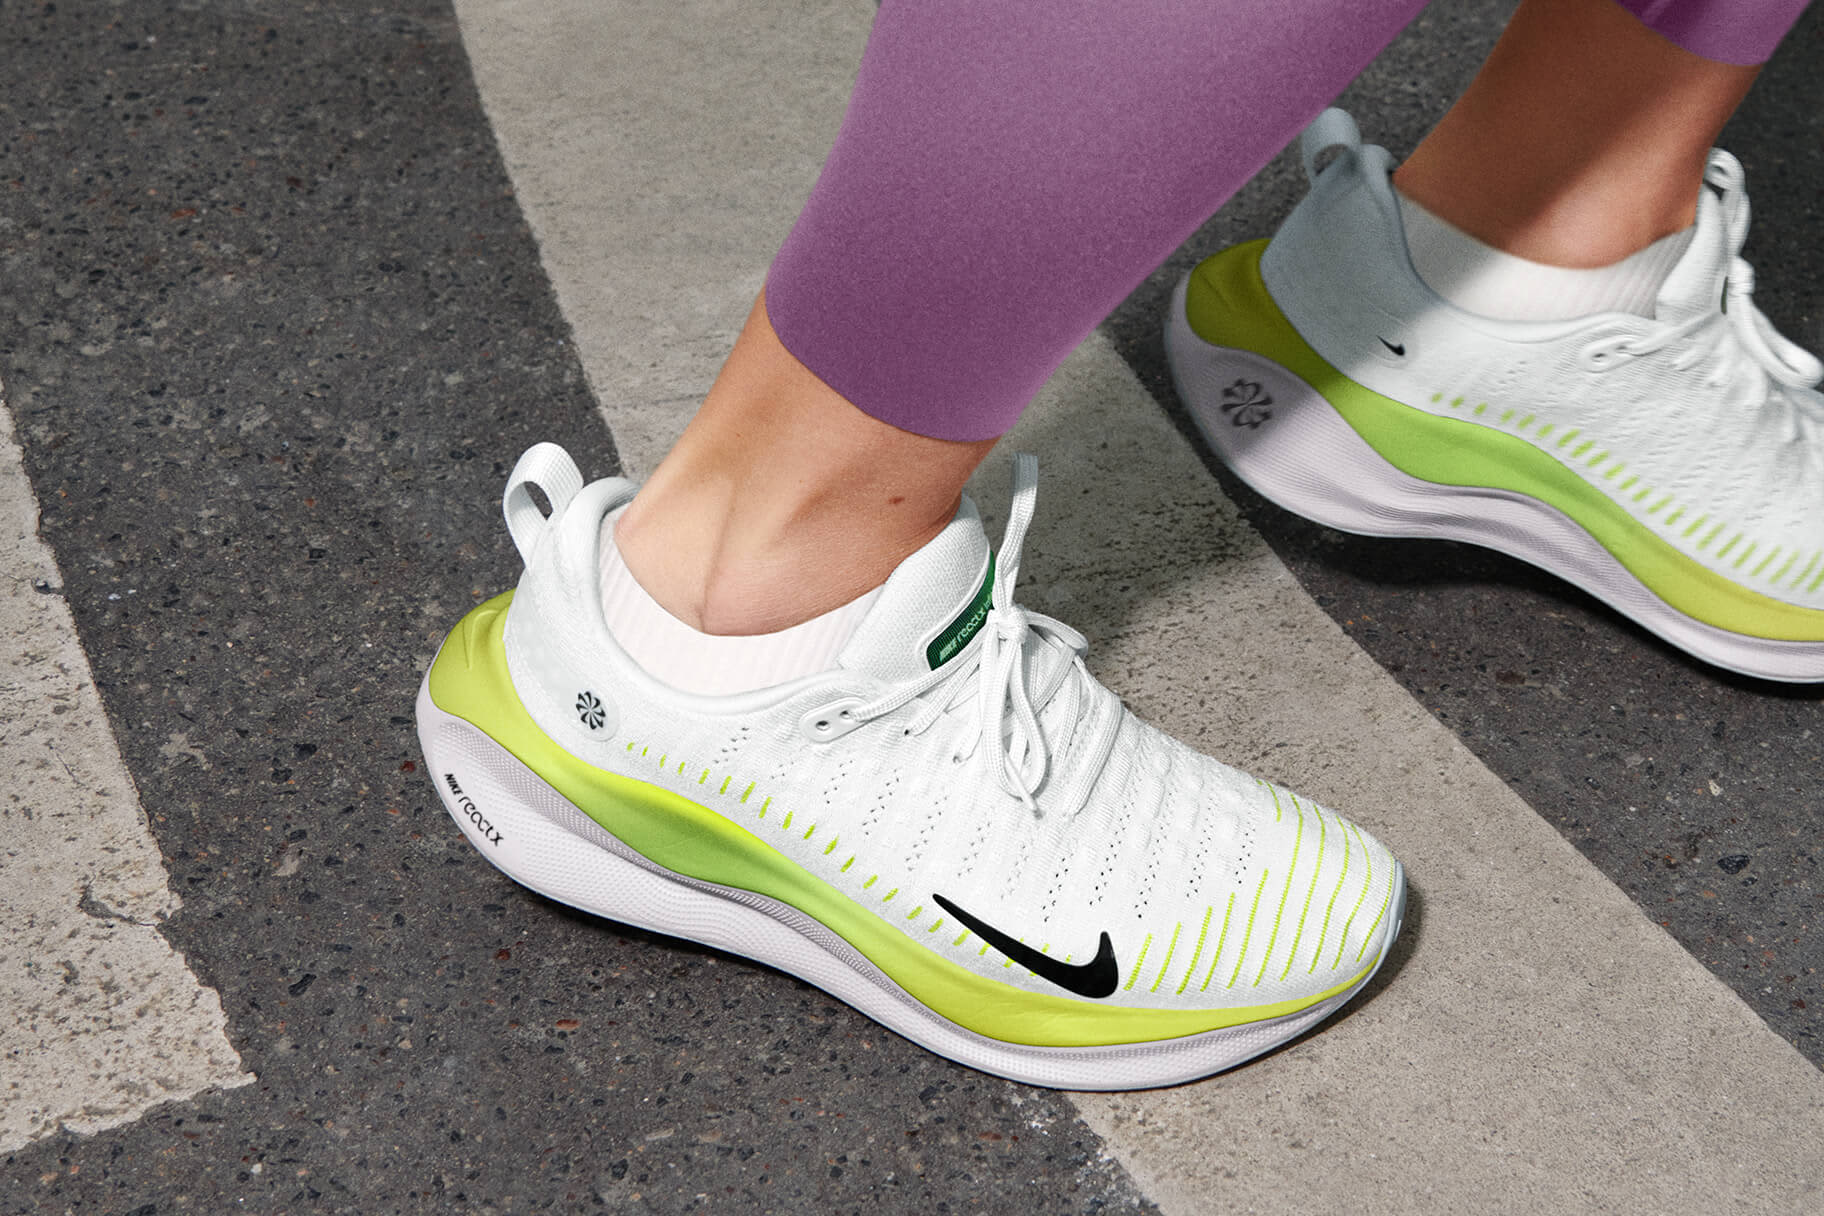 Nike releases its ReactX technology, aiming to optimise energy return and lower its carbon footprint